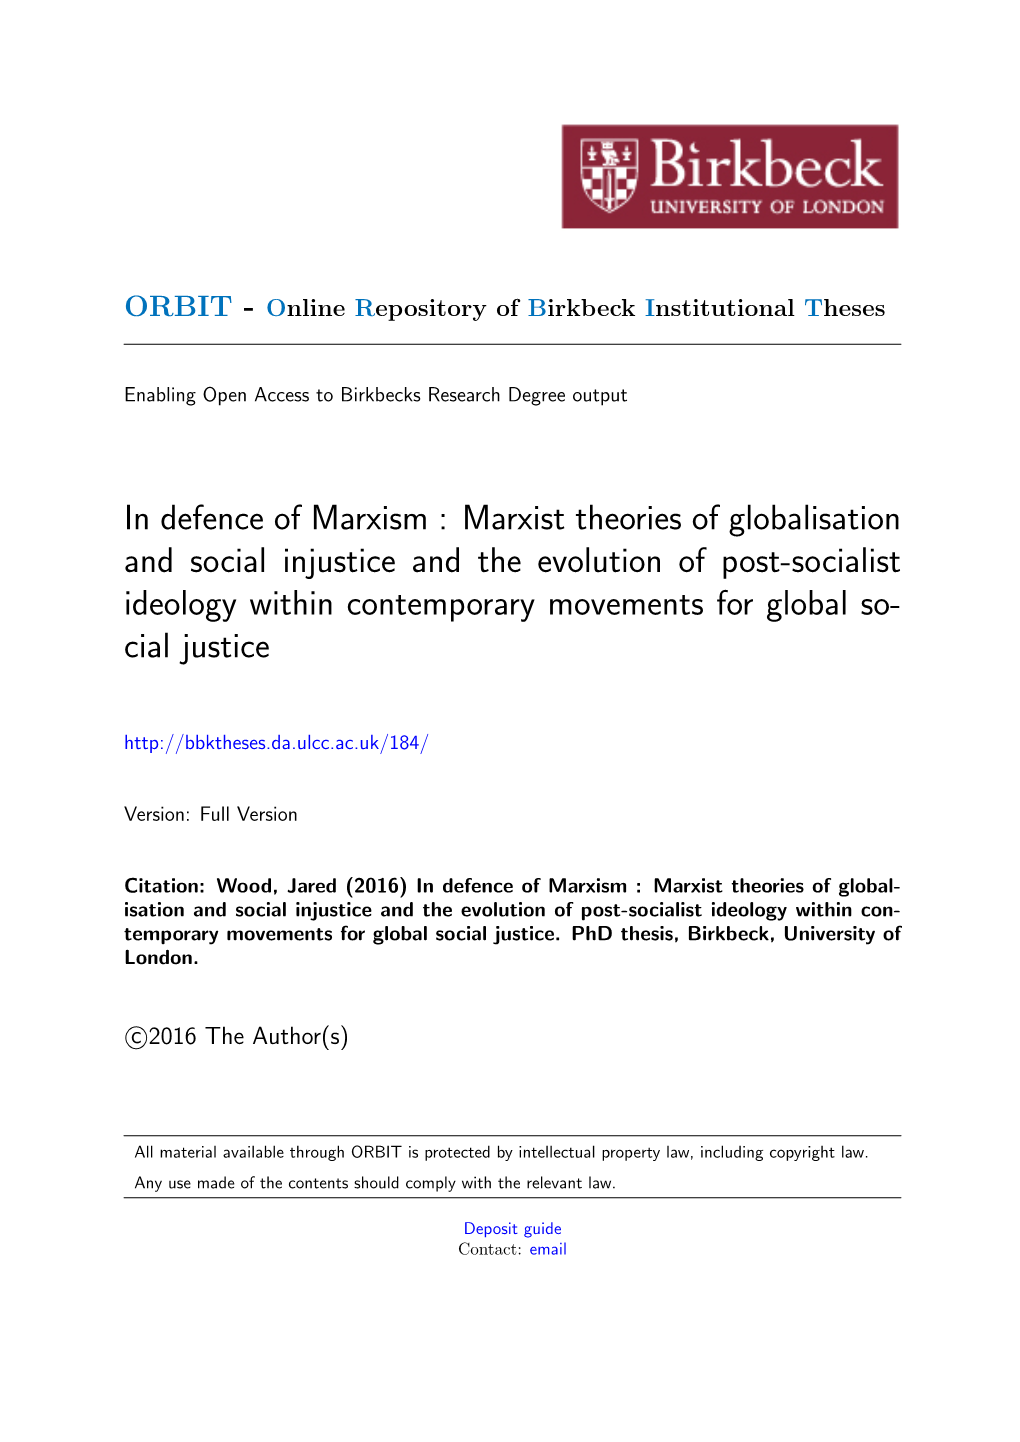 In Defence of Marxism : Marxist Theories of Globalisation and Social Injustice and the Evolution of Post-Socialist Ideology With